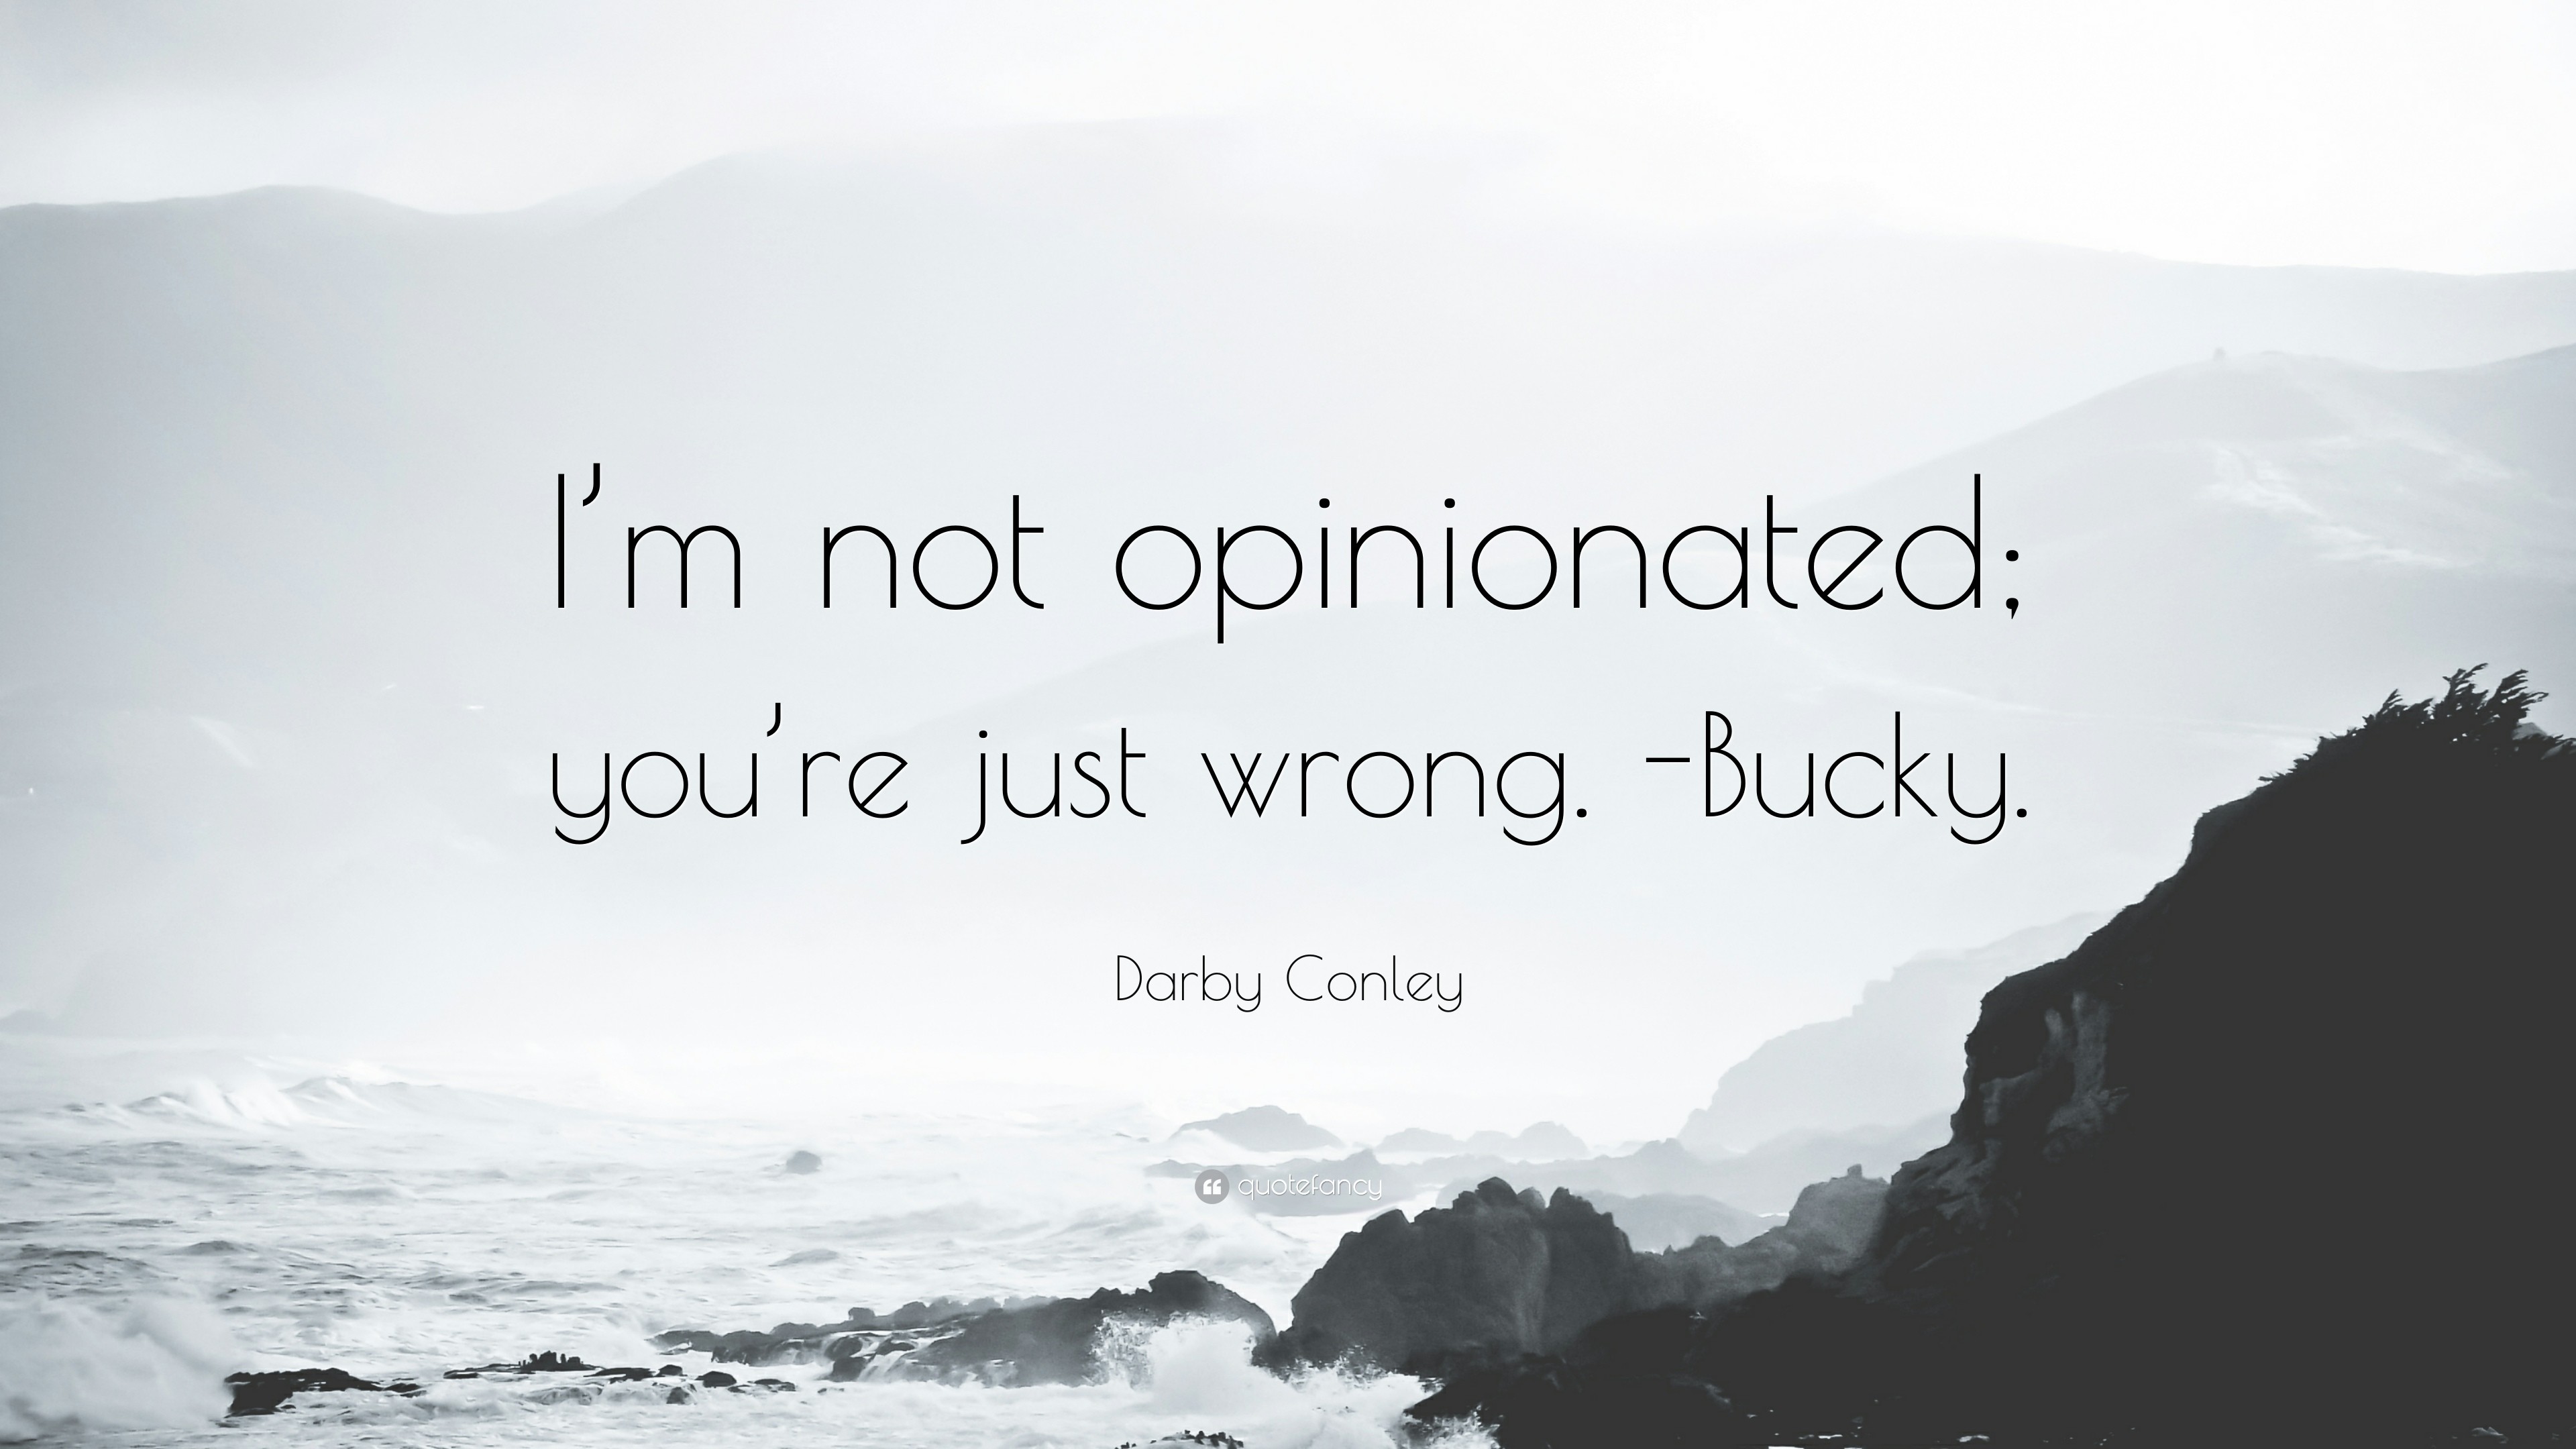 3840x2160 Darby Conley Quote: “I'm not opinionated; you're just wrong